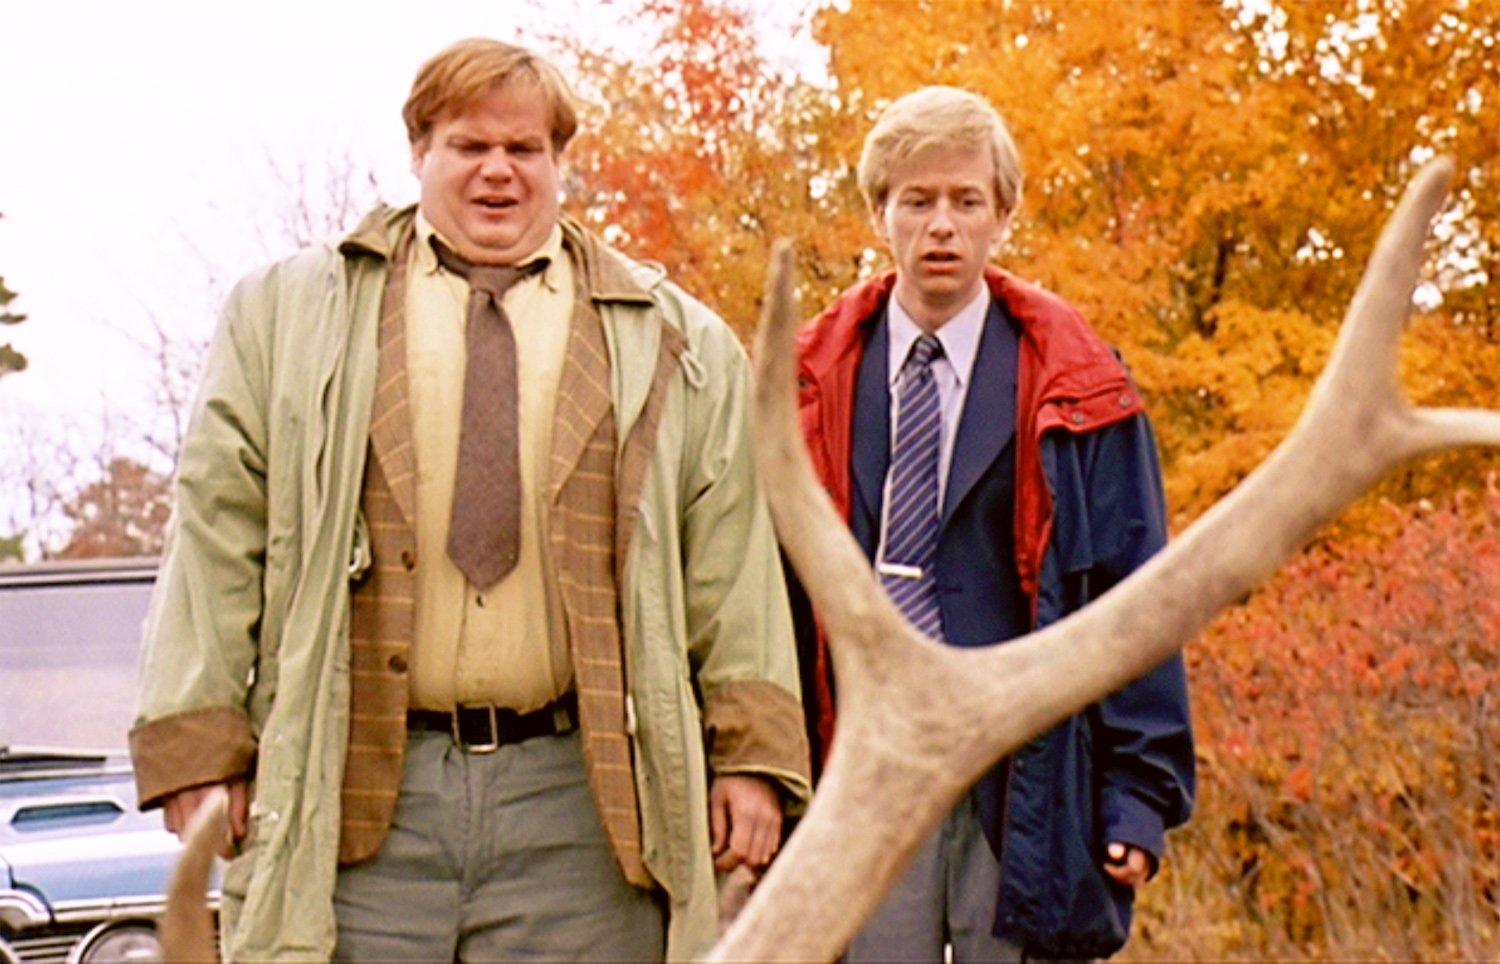 Chris Farley and David Spade in a scene from 'Tommy Boy' 